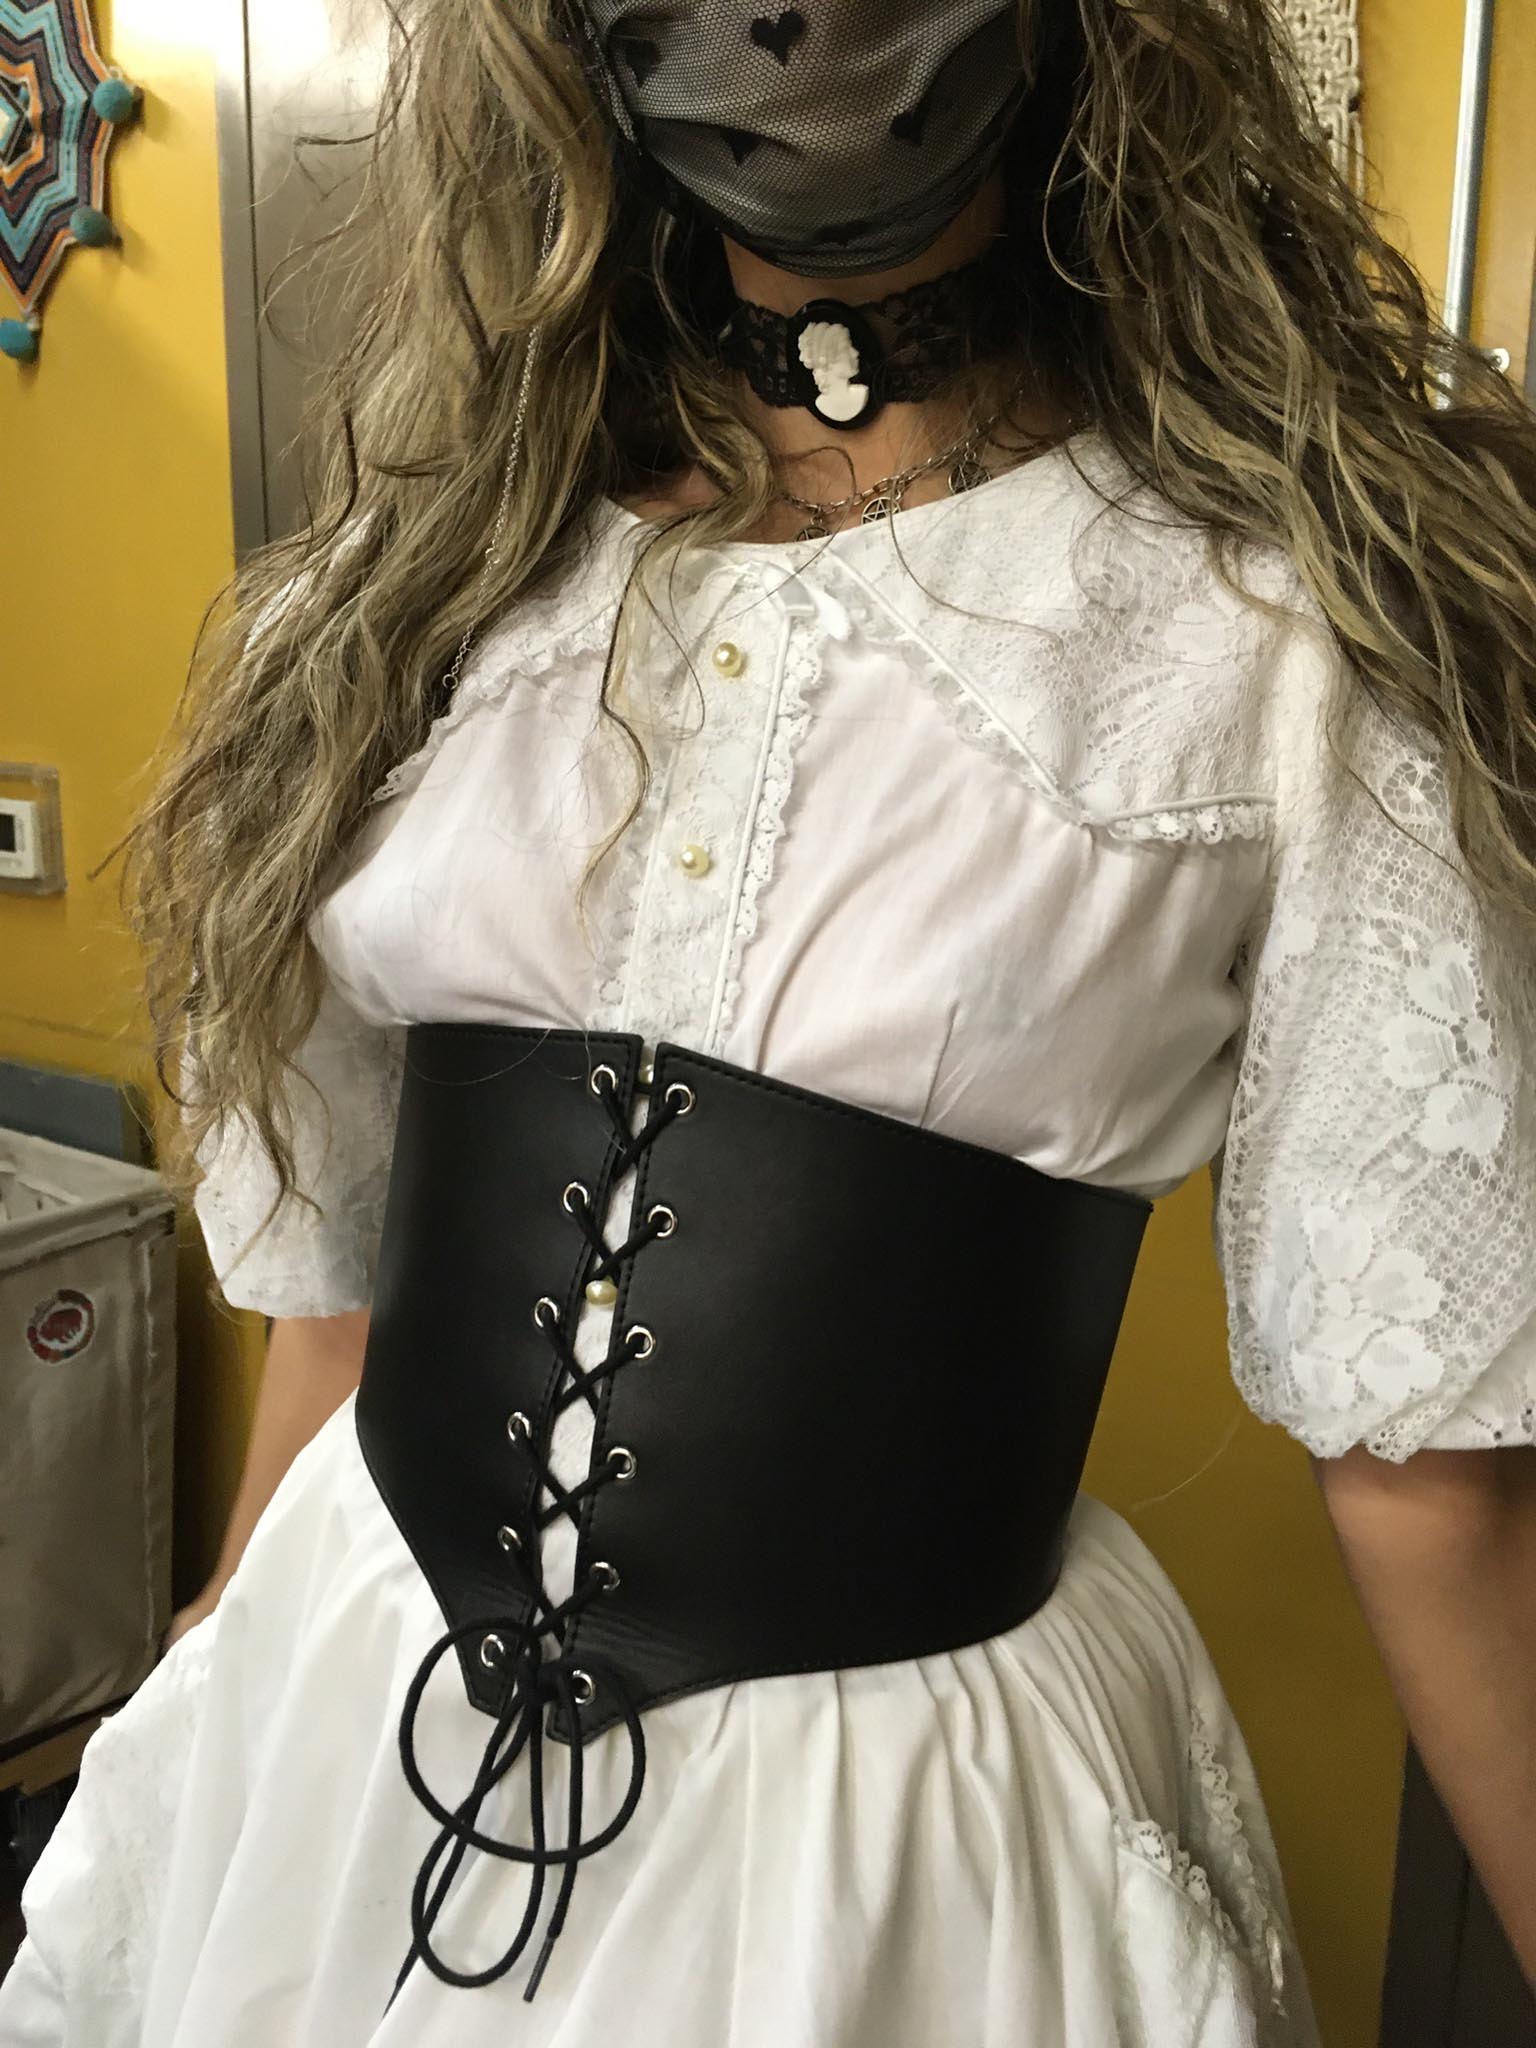 Person wearing black corset belt over white, Victorian-inspired dress